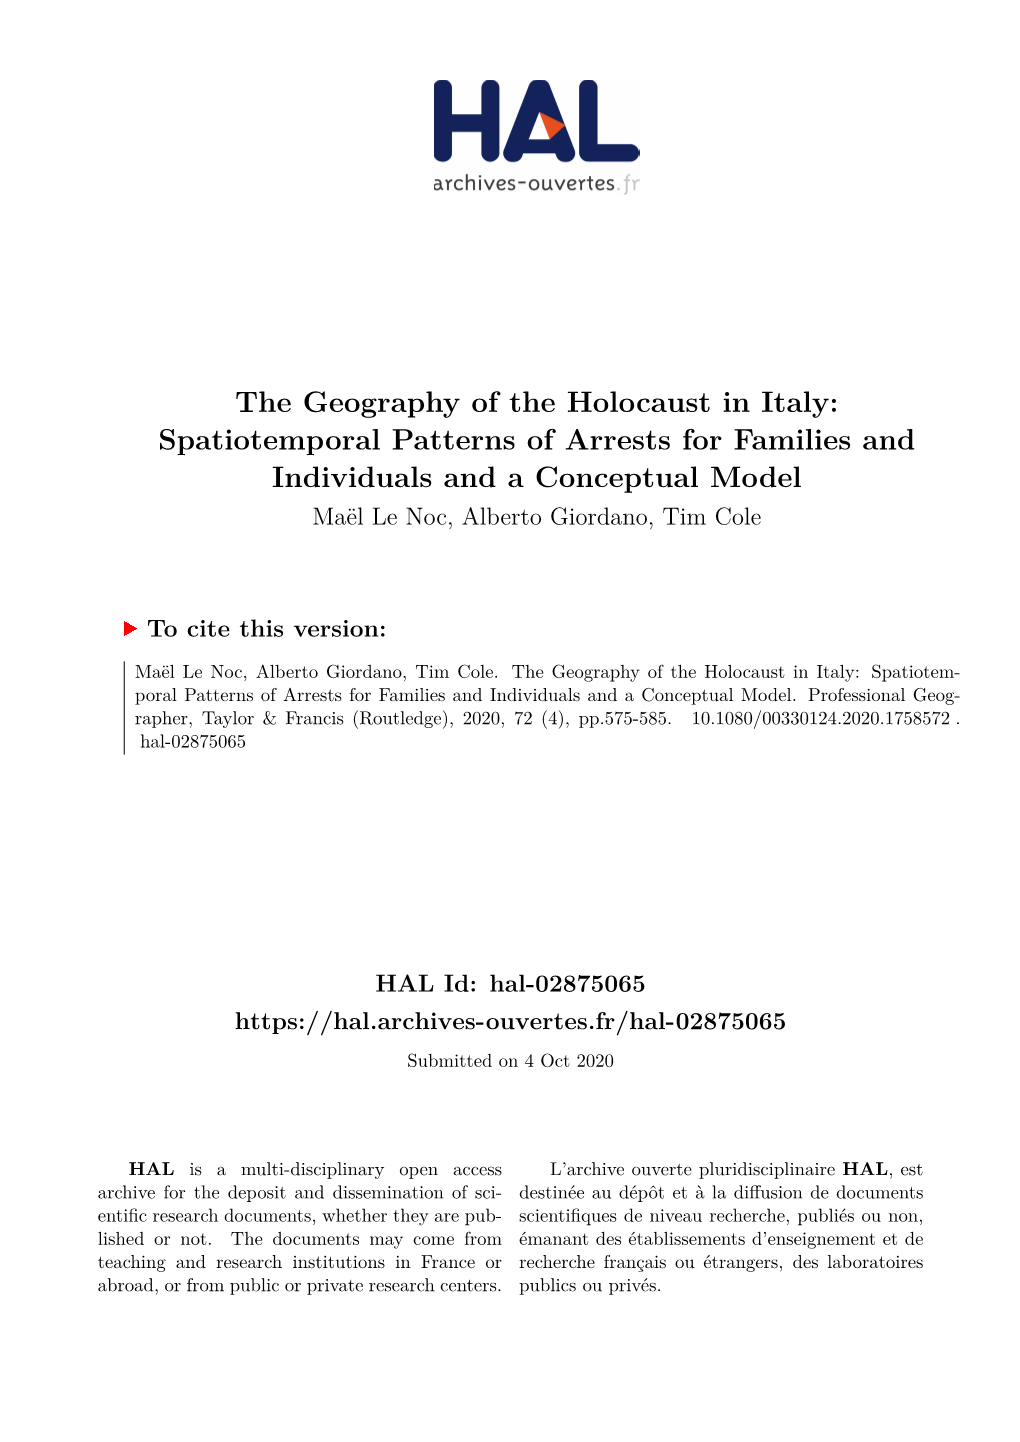 The Geography of the Holocaust in Italy: Spatiotemporal Patterns Of